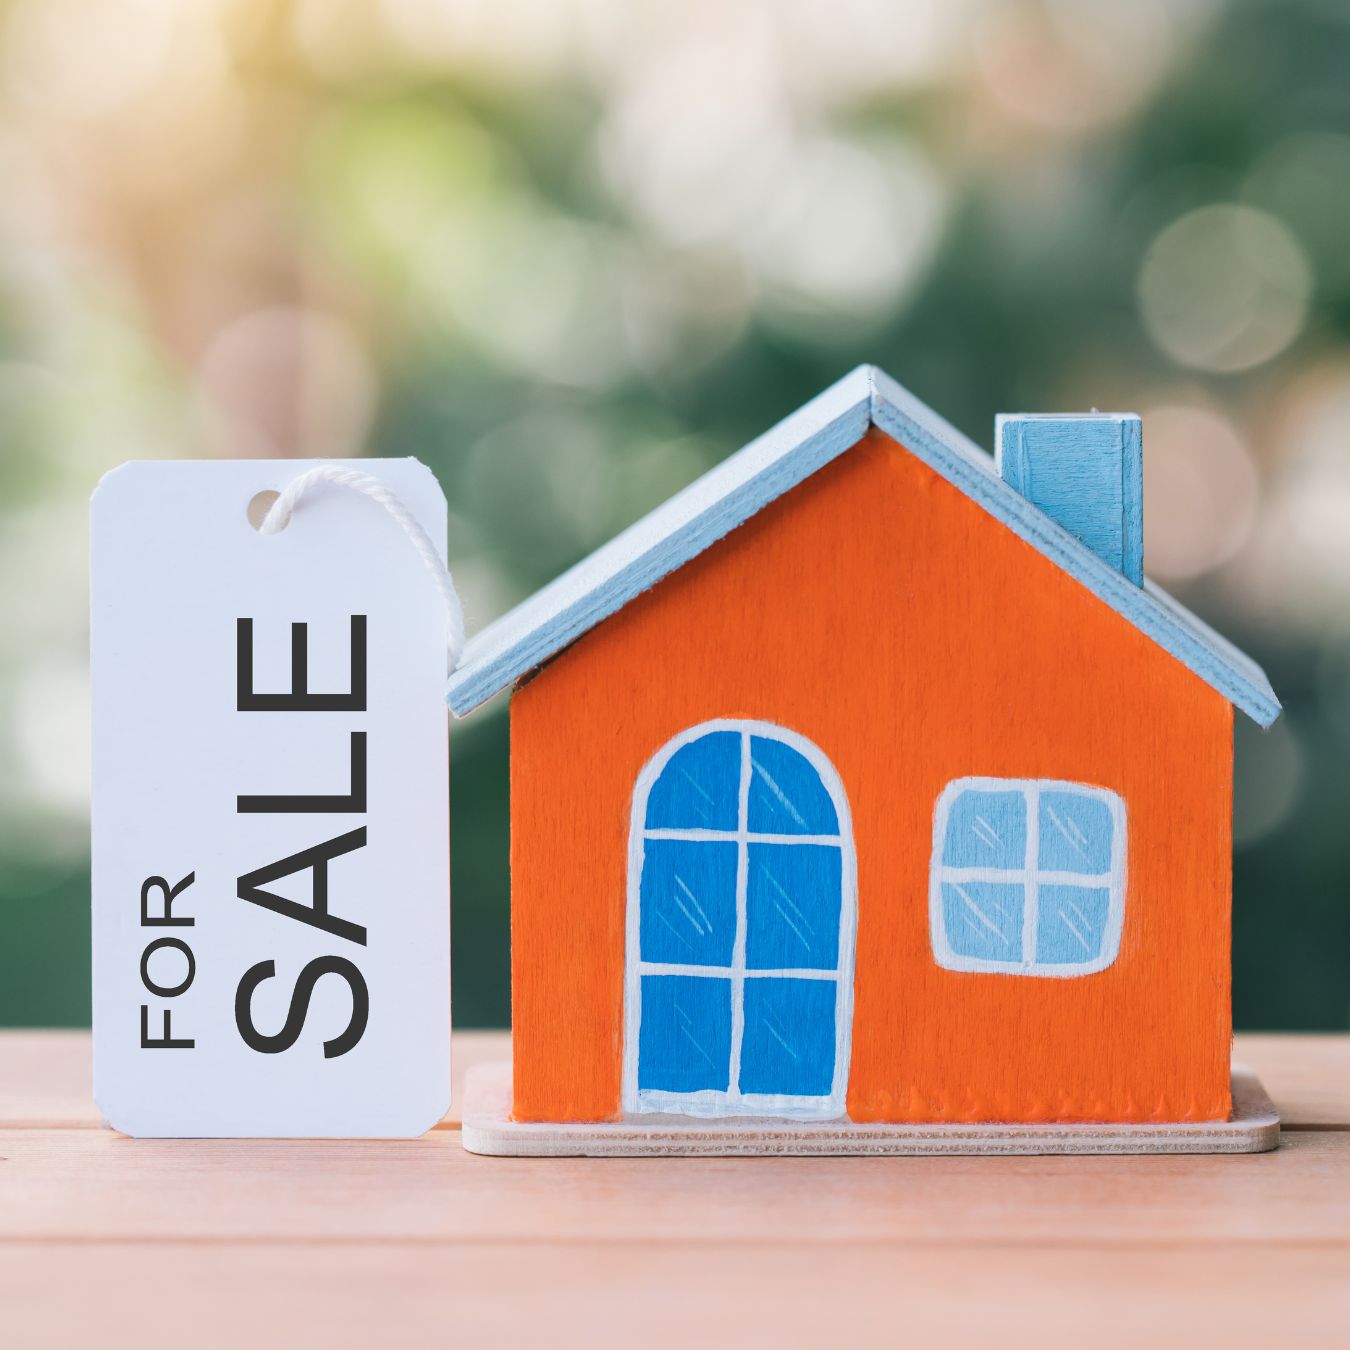 Is It Time To Sell Your Second Home?